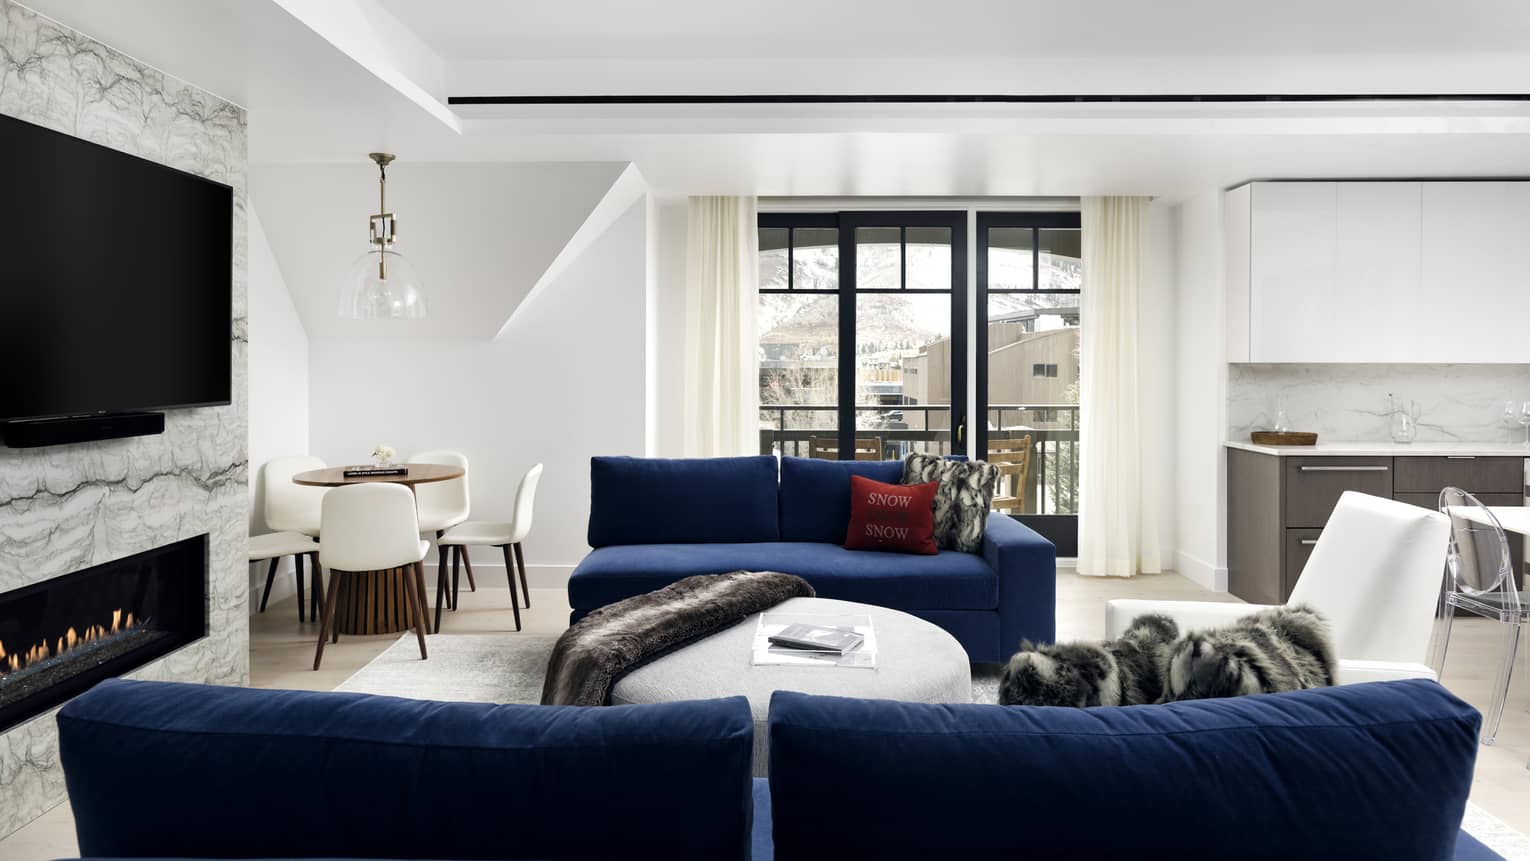 Living room with two dark blue sofas, fireplace, flat-screen TV, windows, white walls